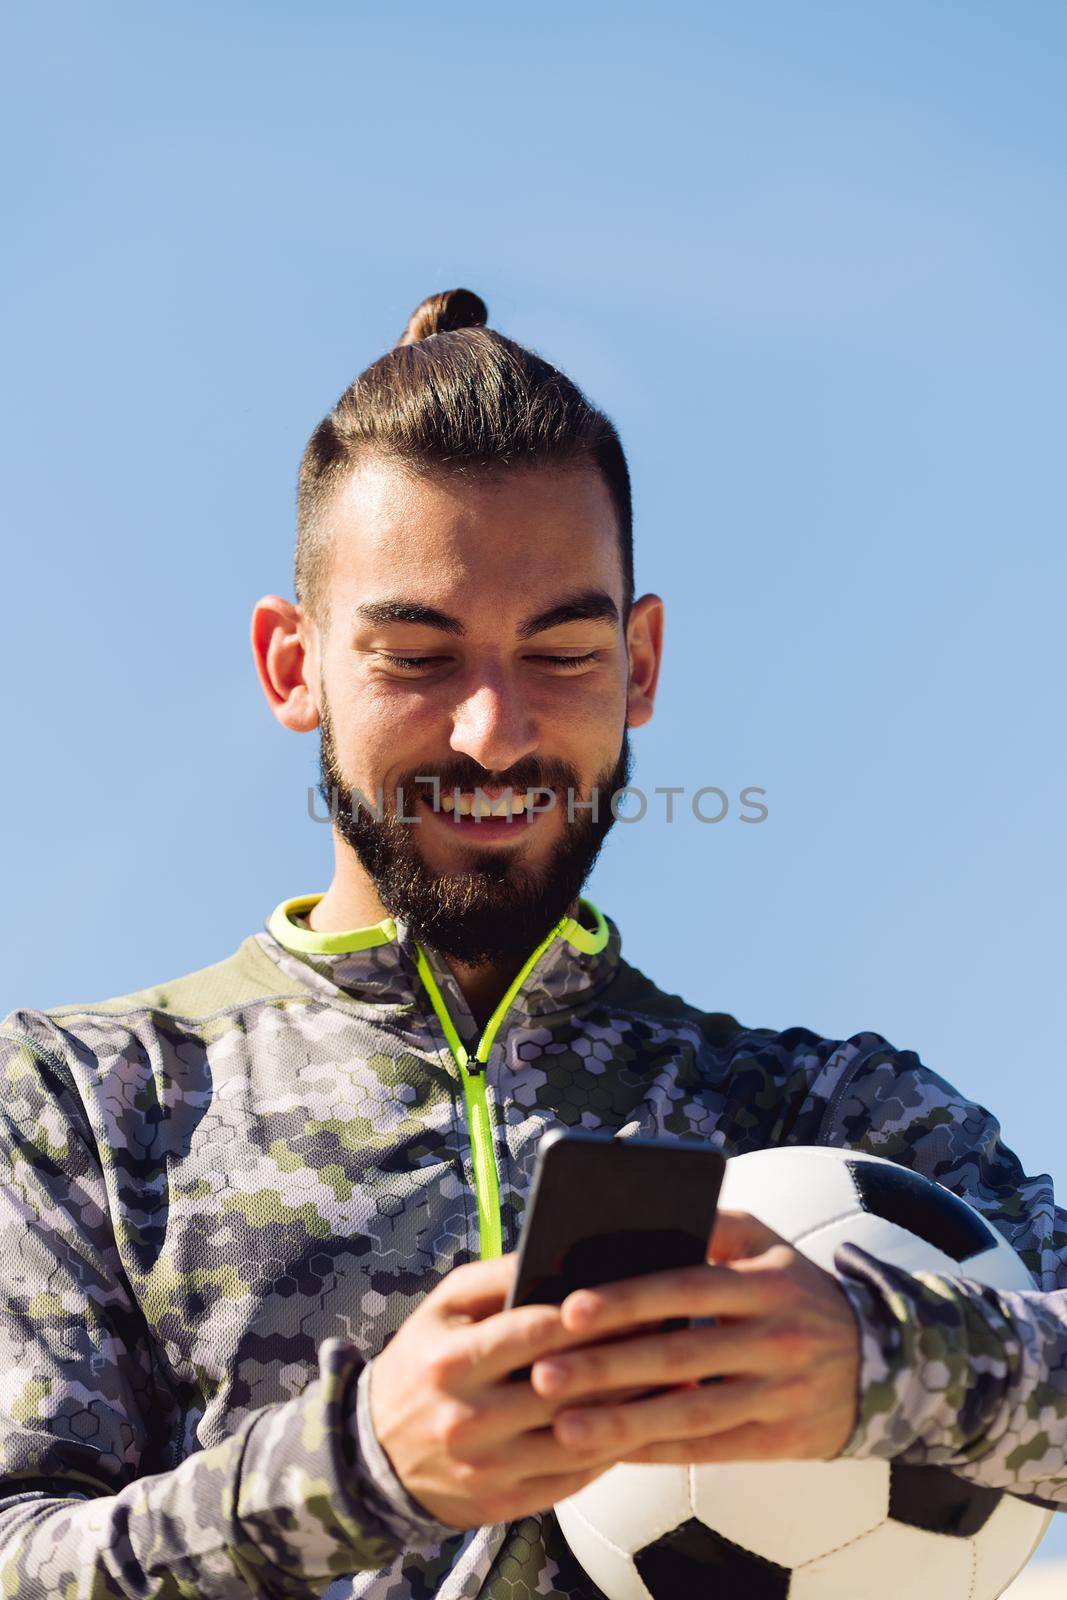 vertical portrait of a happy sportsman with a soccer ball laughing looking his cell phone, concept of technology and urban sport lifestyle in the city, copy space for text